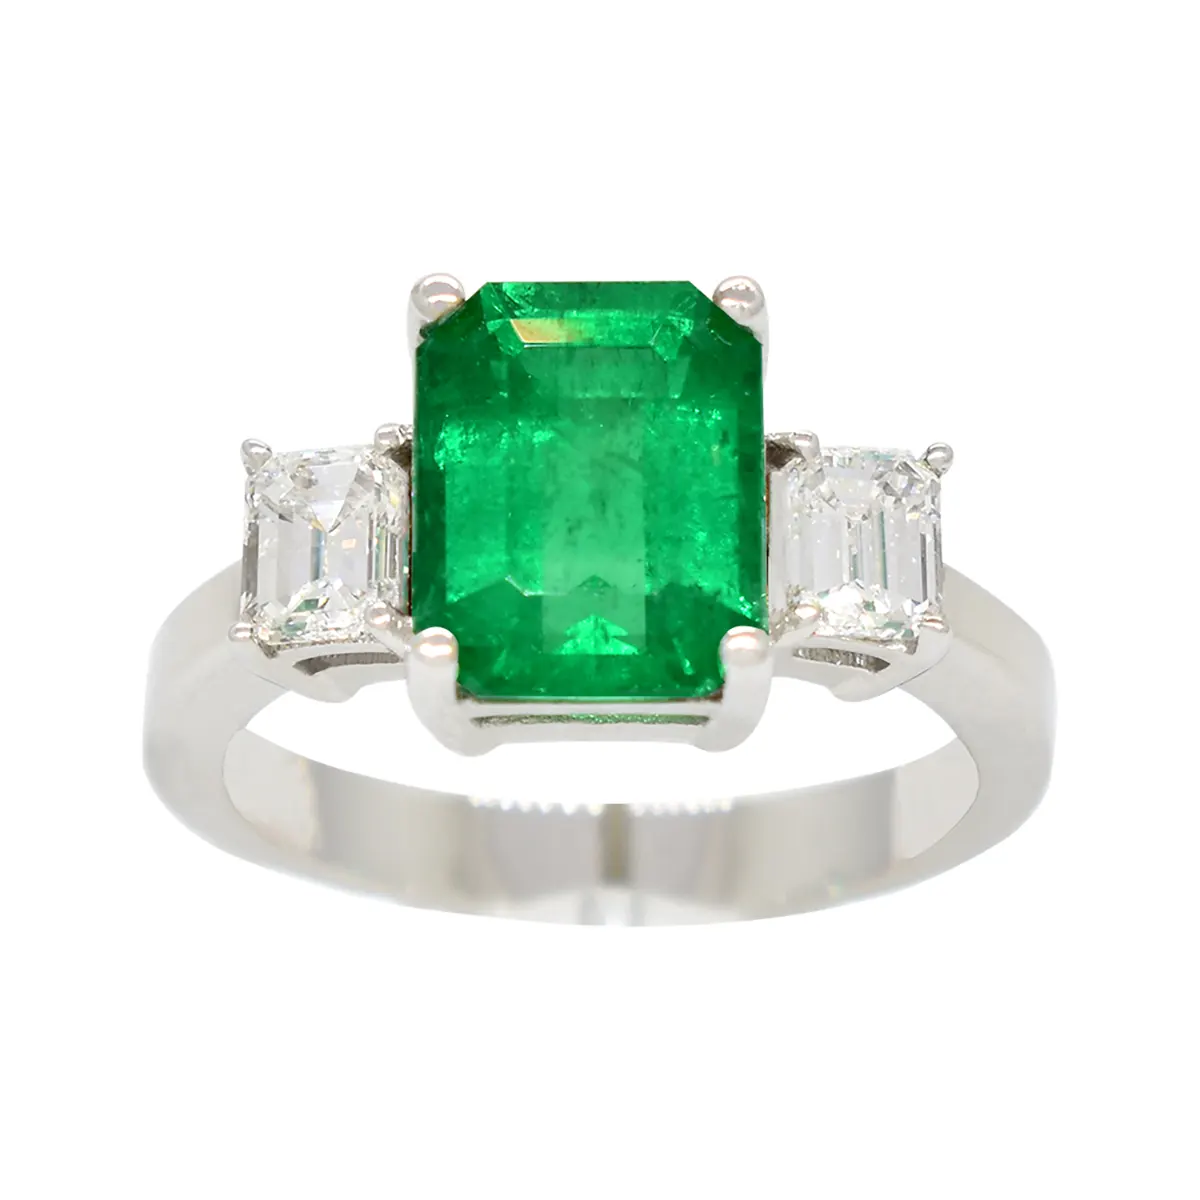 Emerald Ring in 18K White Gold With Emerald Cut Diamonds in 3 Stones Ring Style